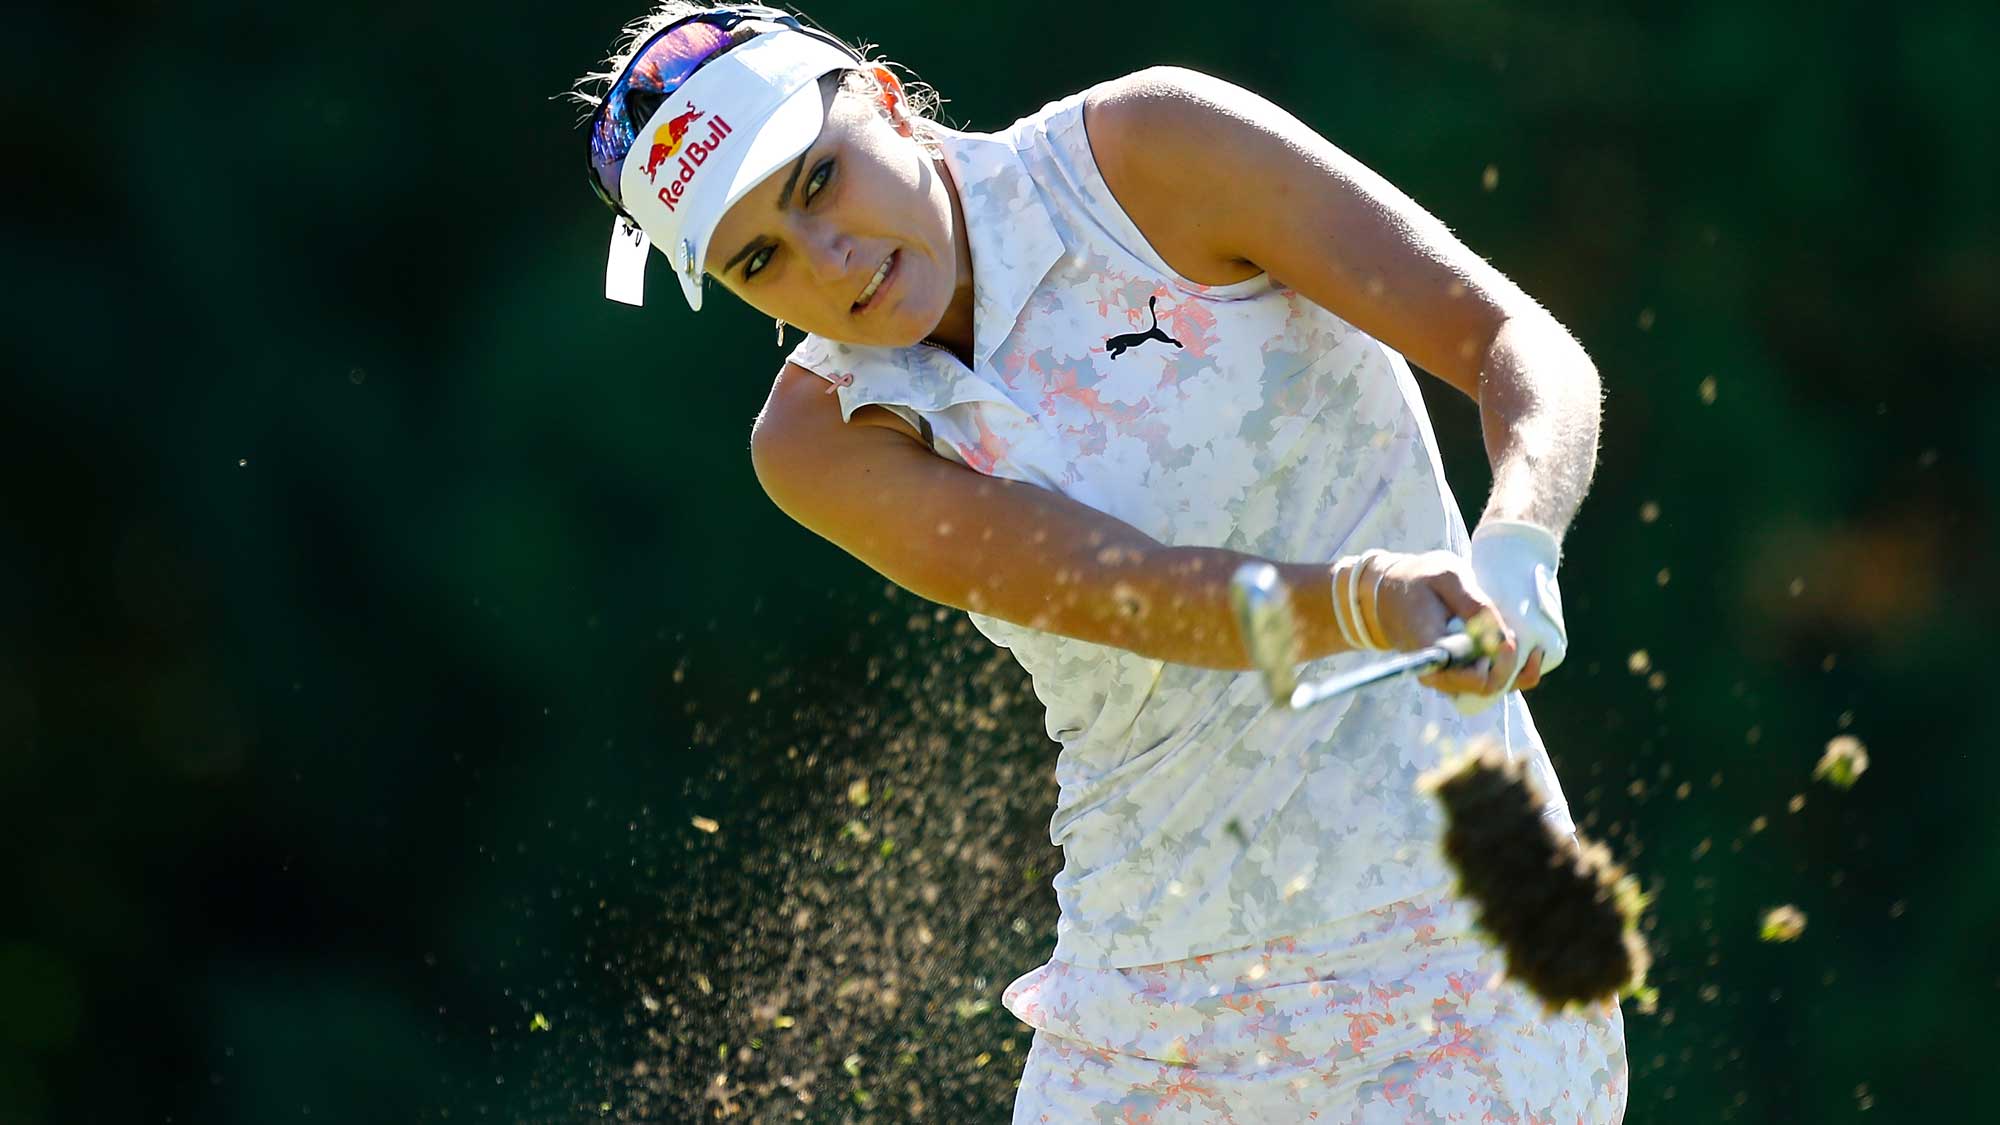 Lexi Thompson tees off on the 2nd hole during the second round of the LPGA Cambia Portland Classic